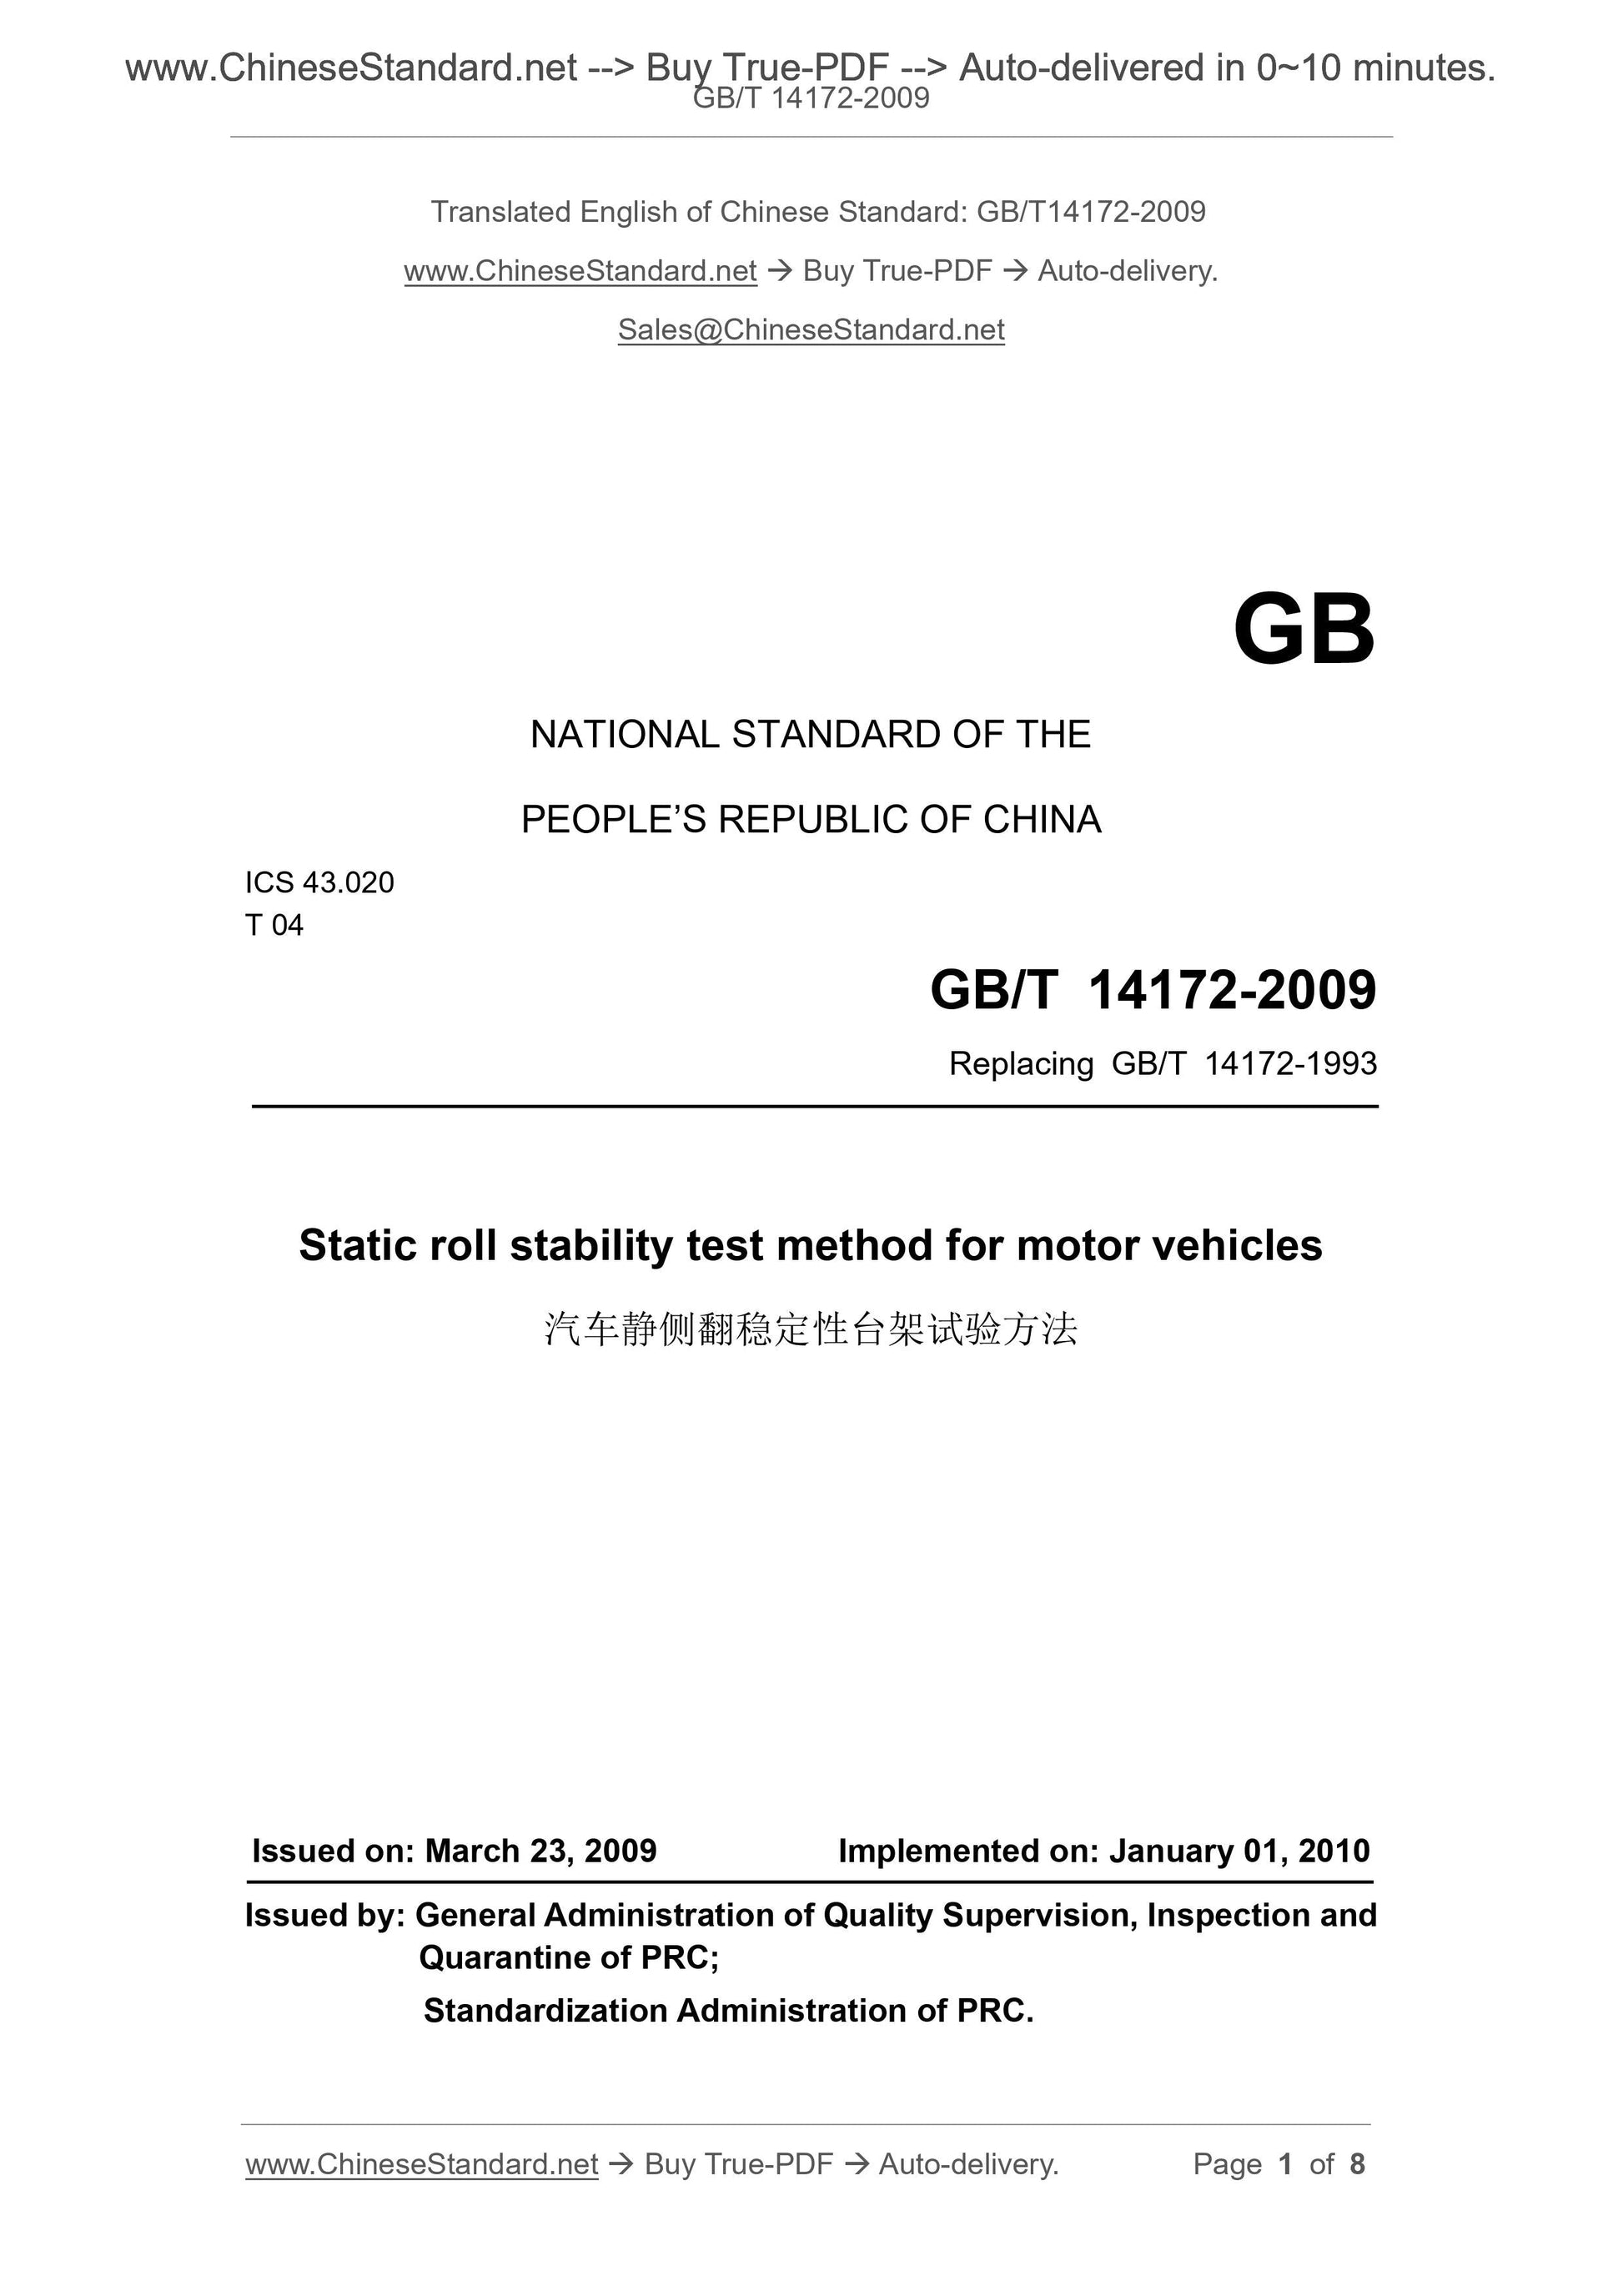 GB/T 14172-2009 Page 1